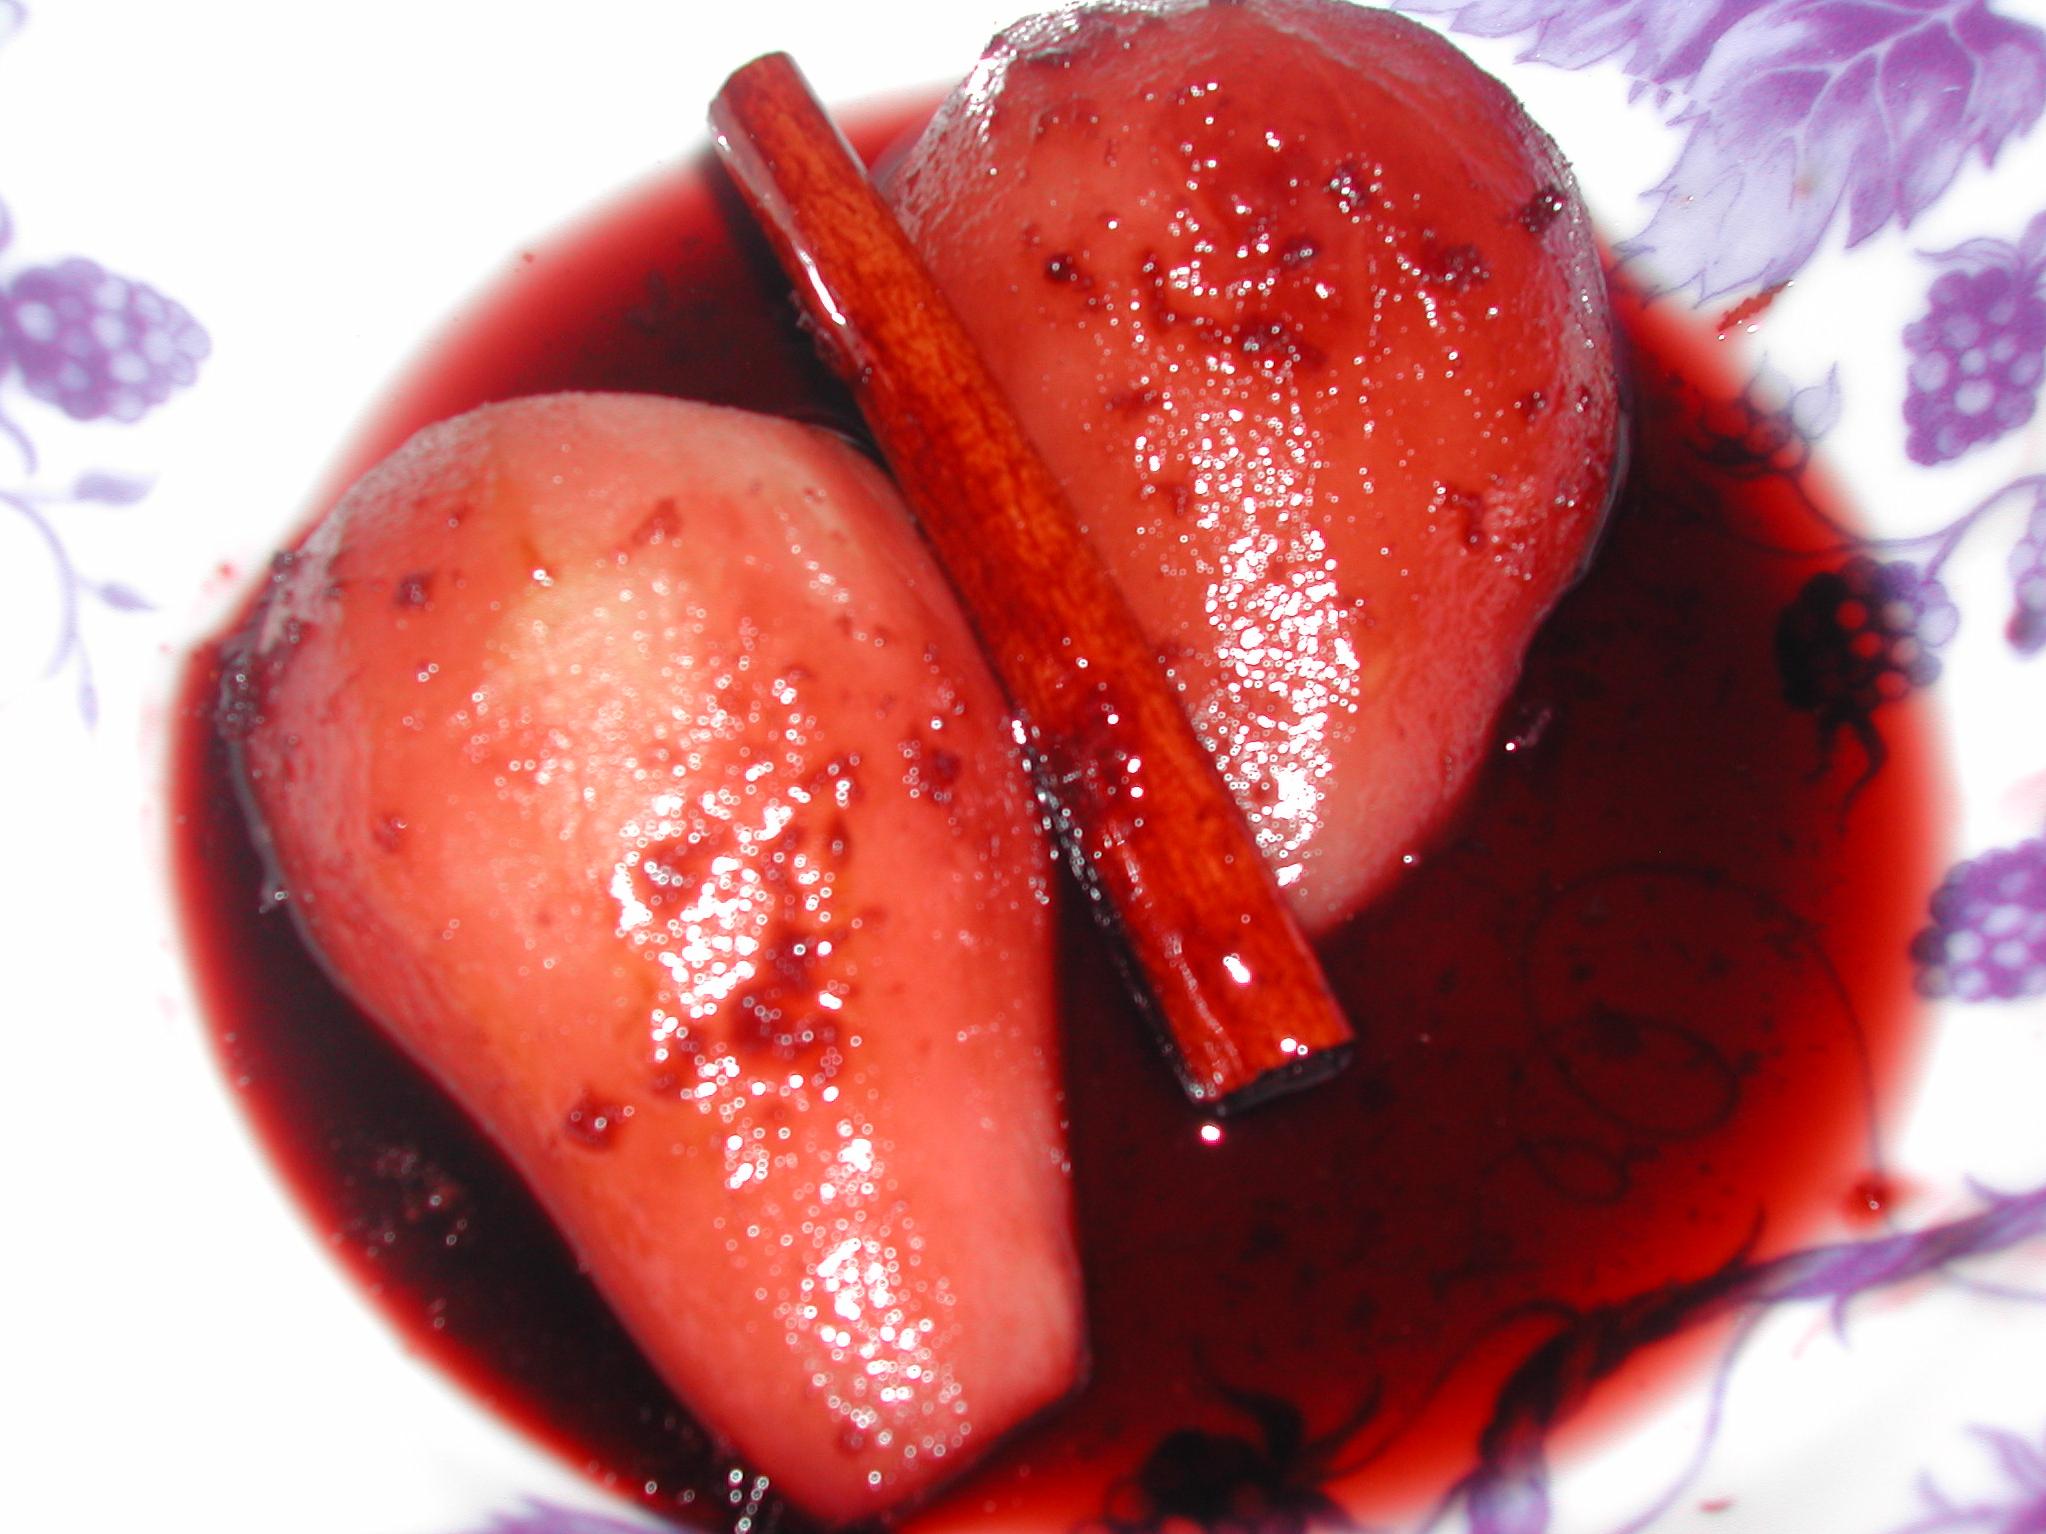  Indulge in a new level of elegance with these poached pears in spiced wine.